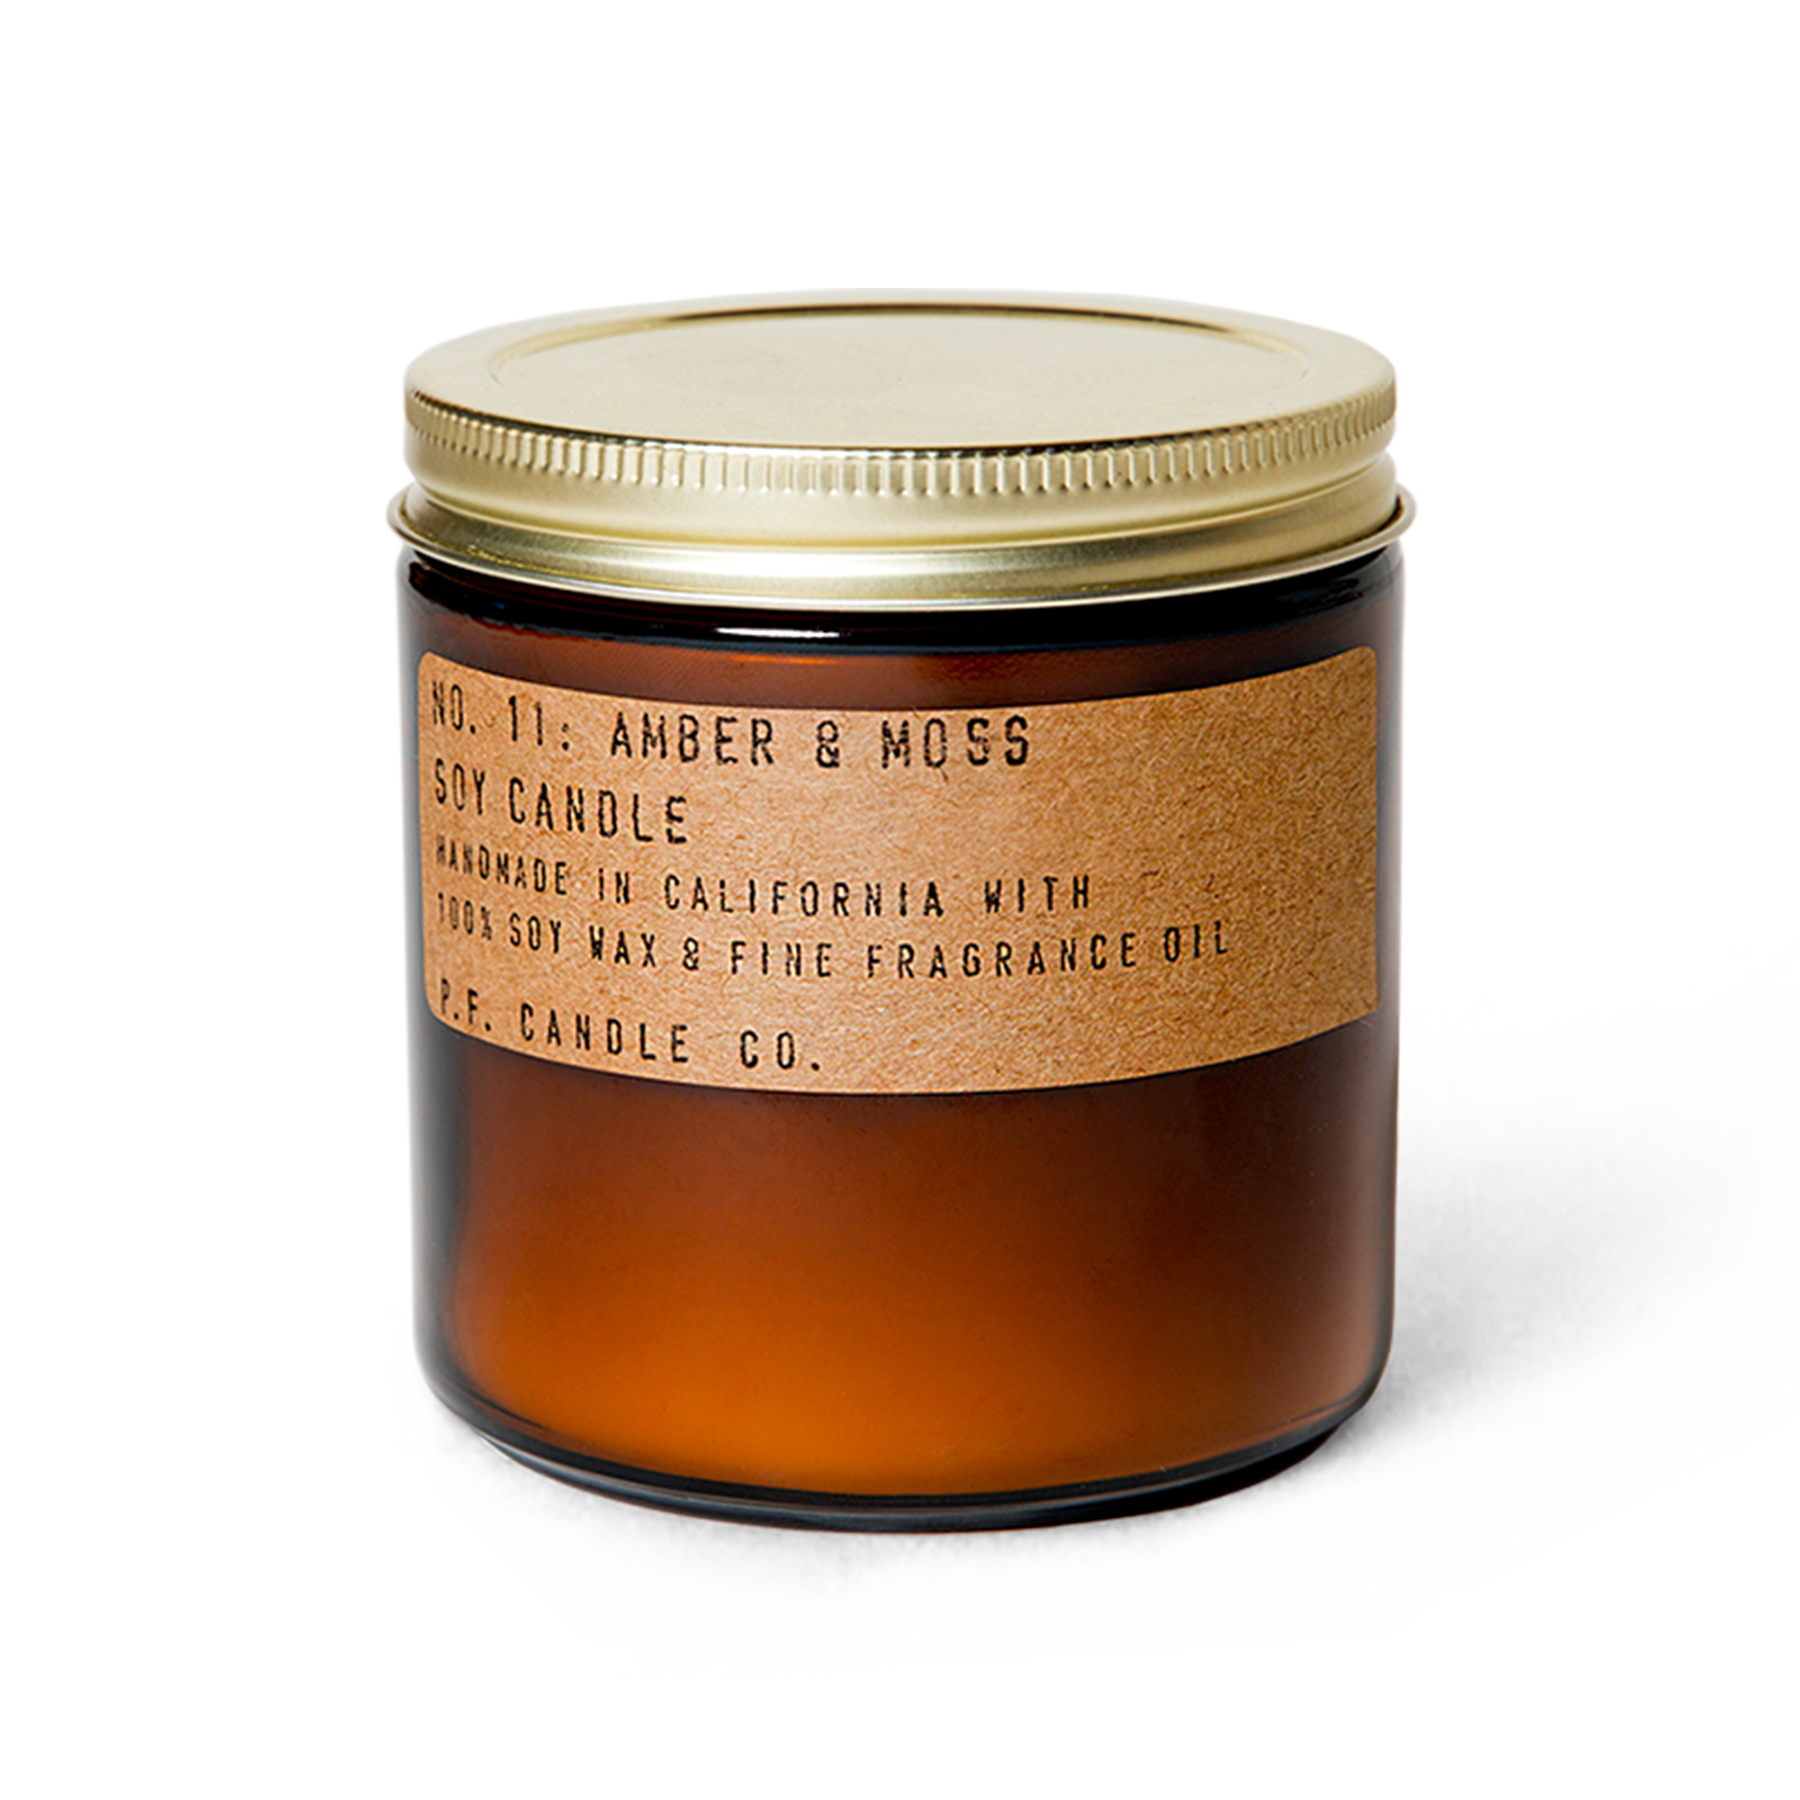 P.F. Candle Co No.11 Amber & Moss Soy Wax Candle